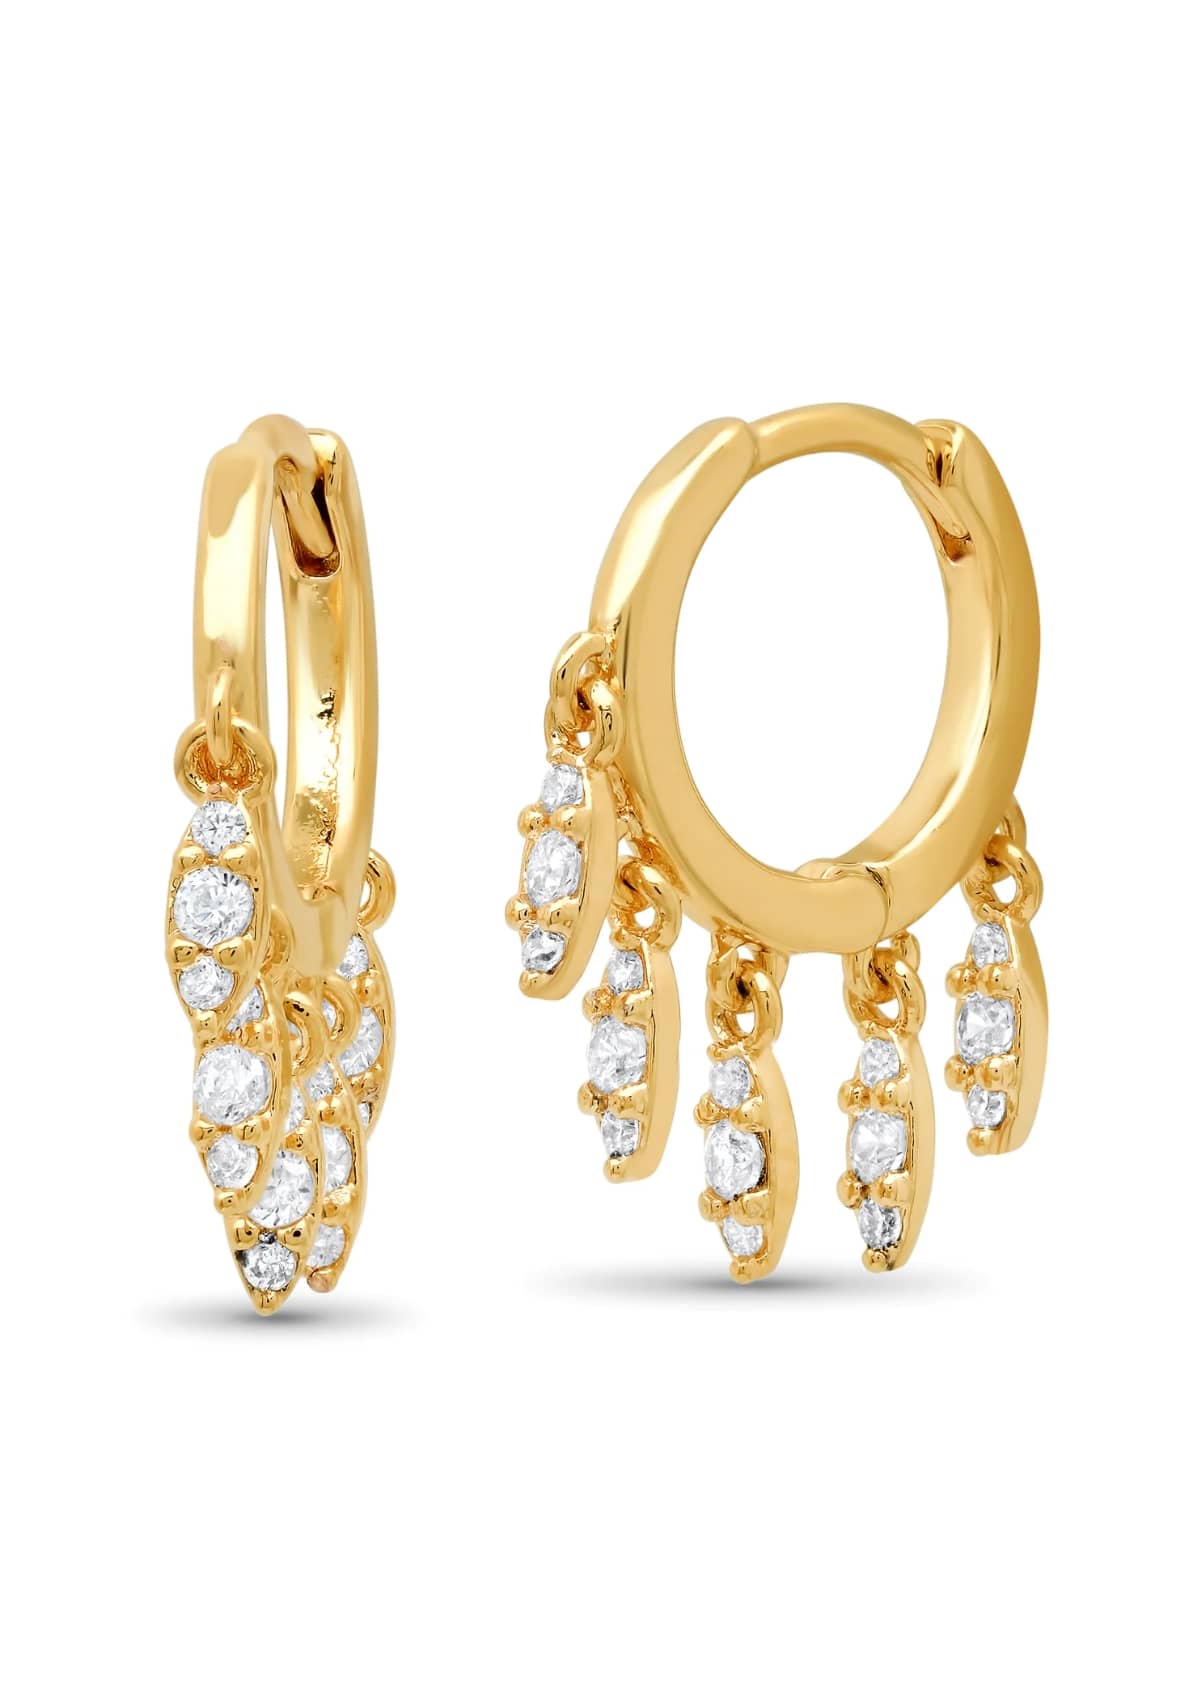 Gold Huggie Earrings with Pave CZ Marquis Shaped Charm Dangles -TAI Jewelry- Ruby Jane-